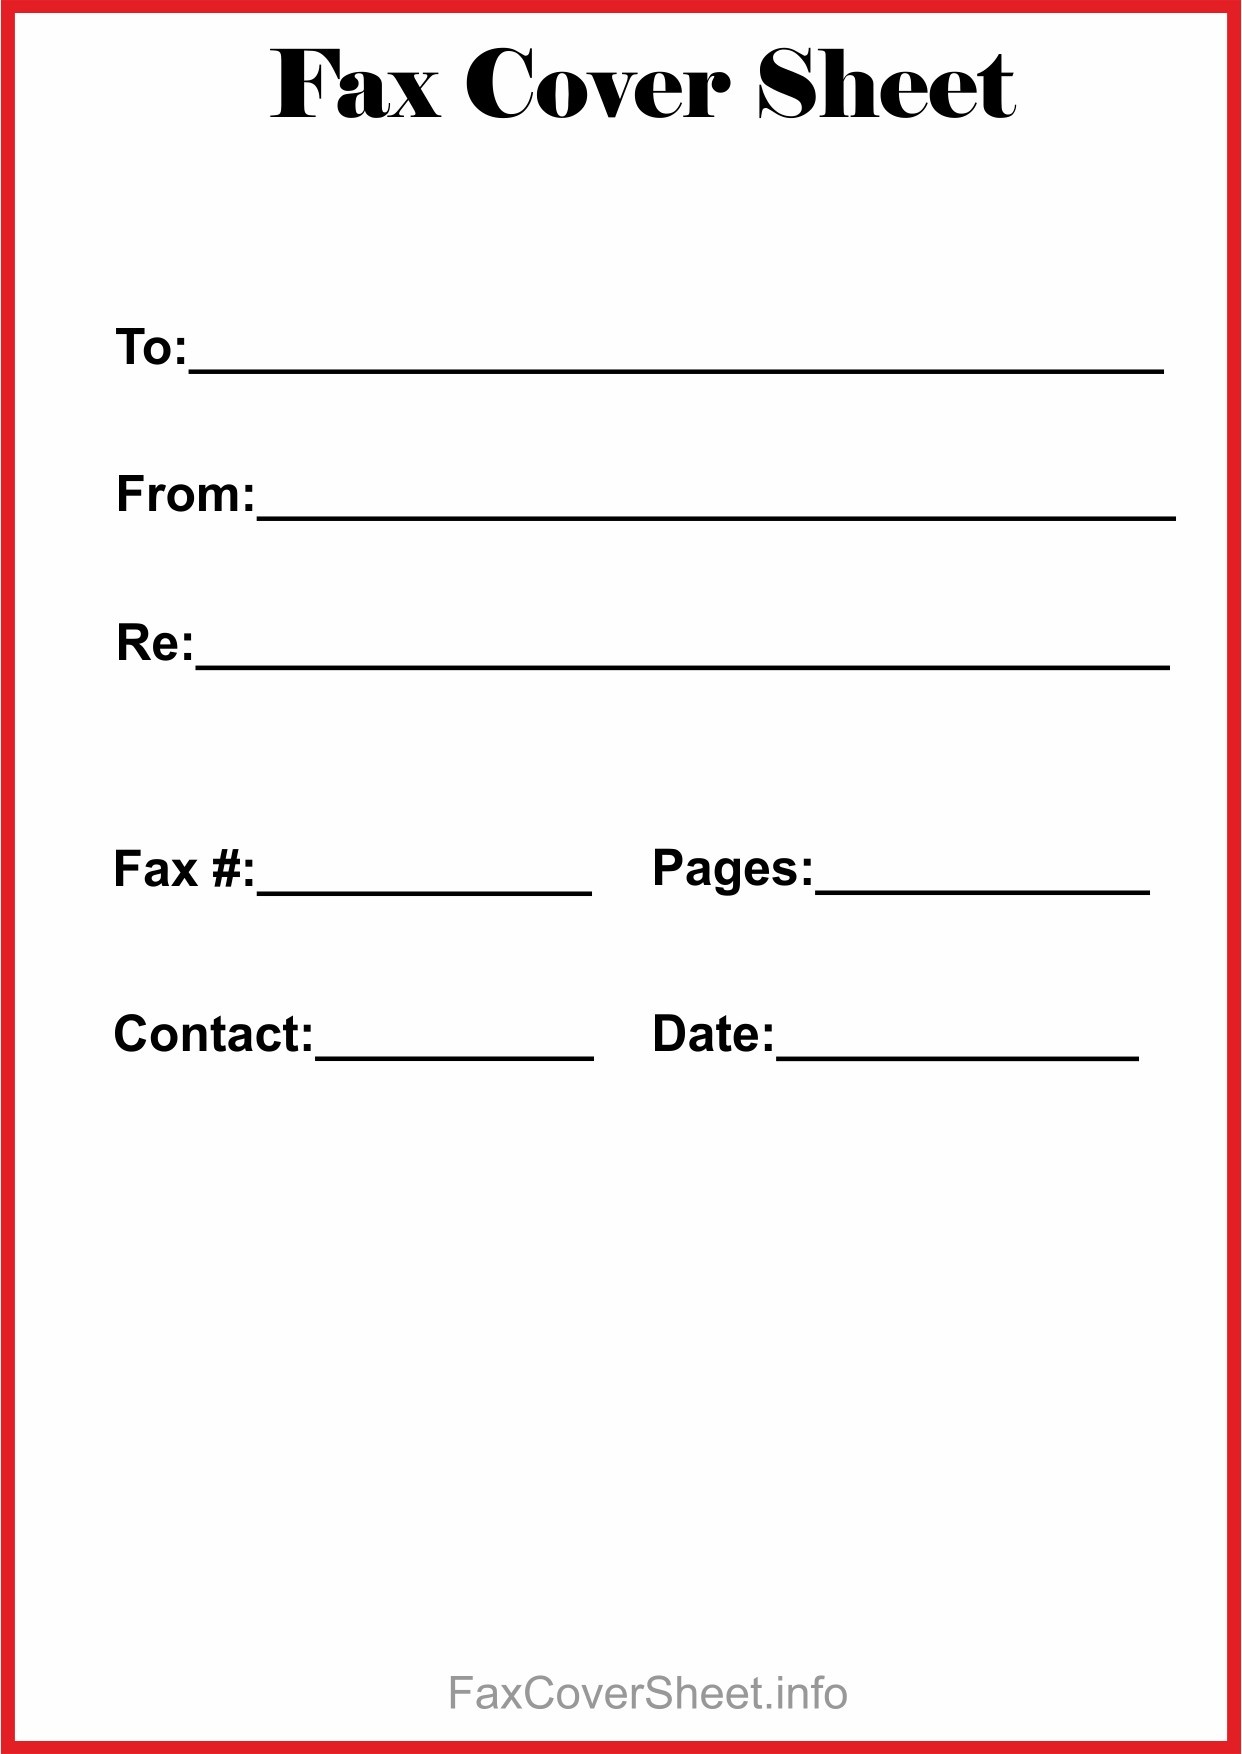 Fax Cover Sheet Fillable New Free Fax Cover Sheet Template - Free Printable Fax Cover Sheet